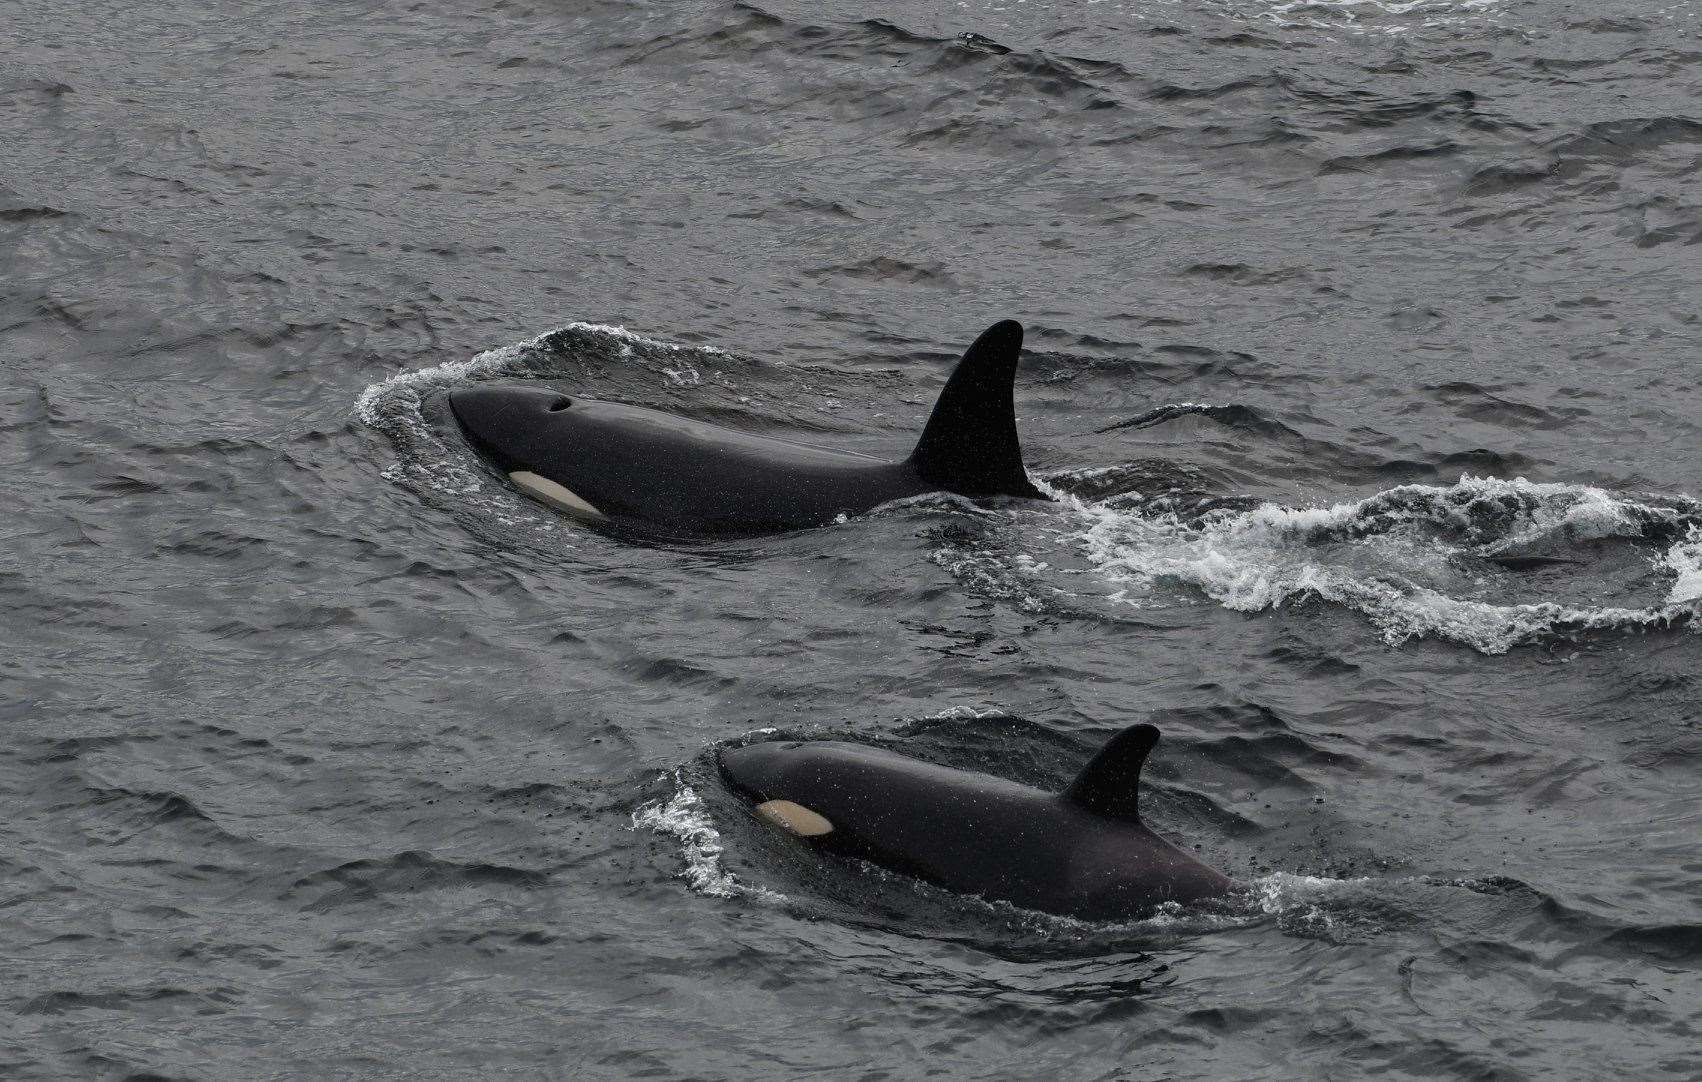 Orcas between Orkney and Caithness today. Picture: Robert Foubister